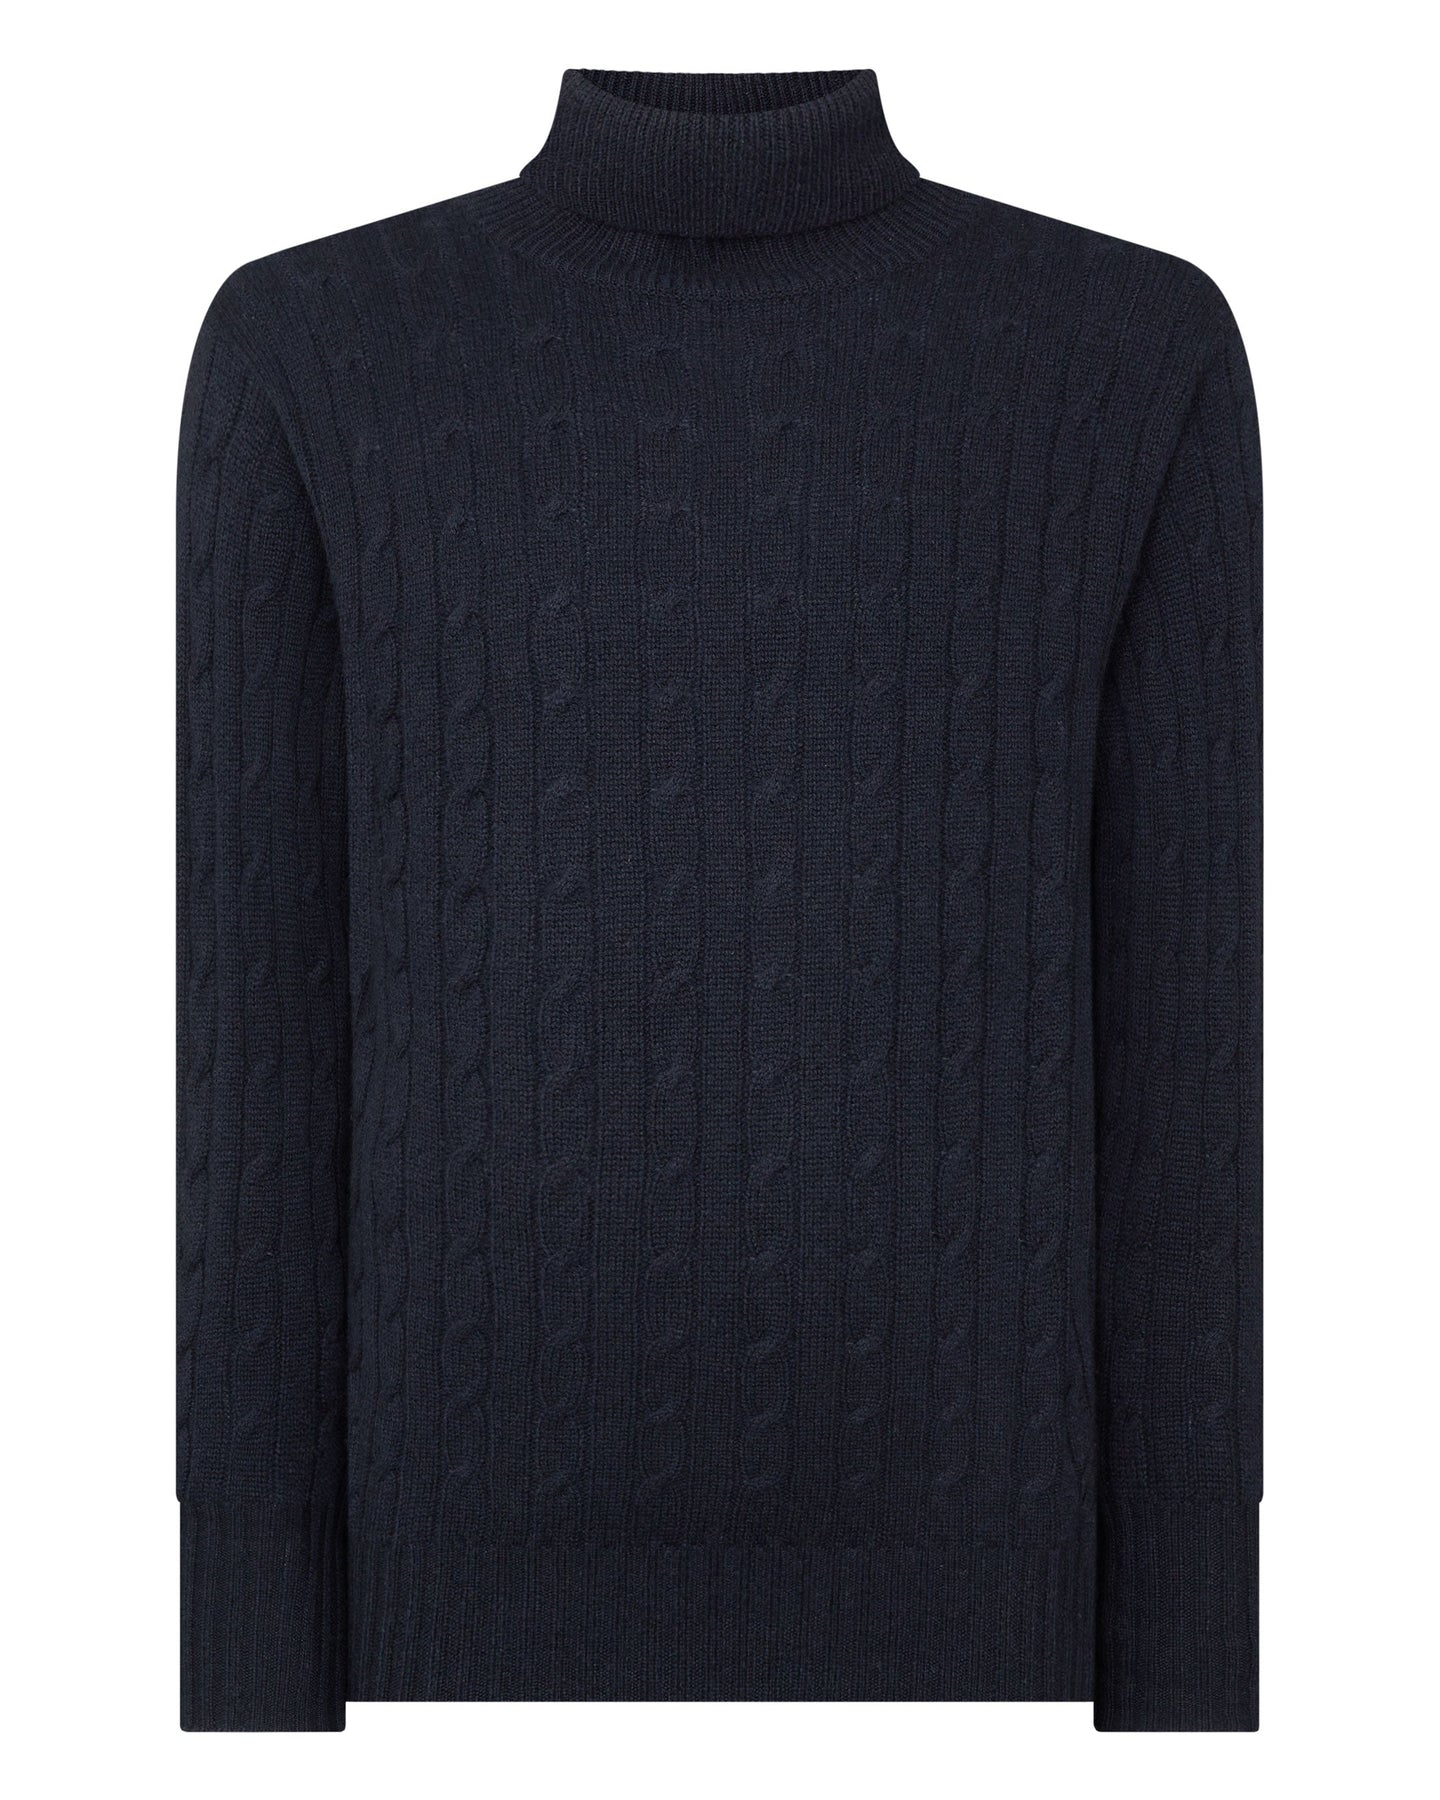 N.Peal Men's Classic Cable Roll Neck Cashmere Jumper Navy Blue